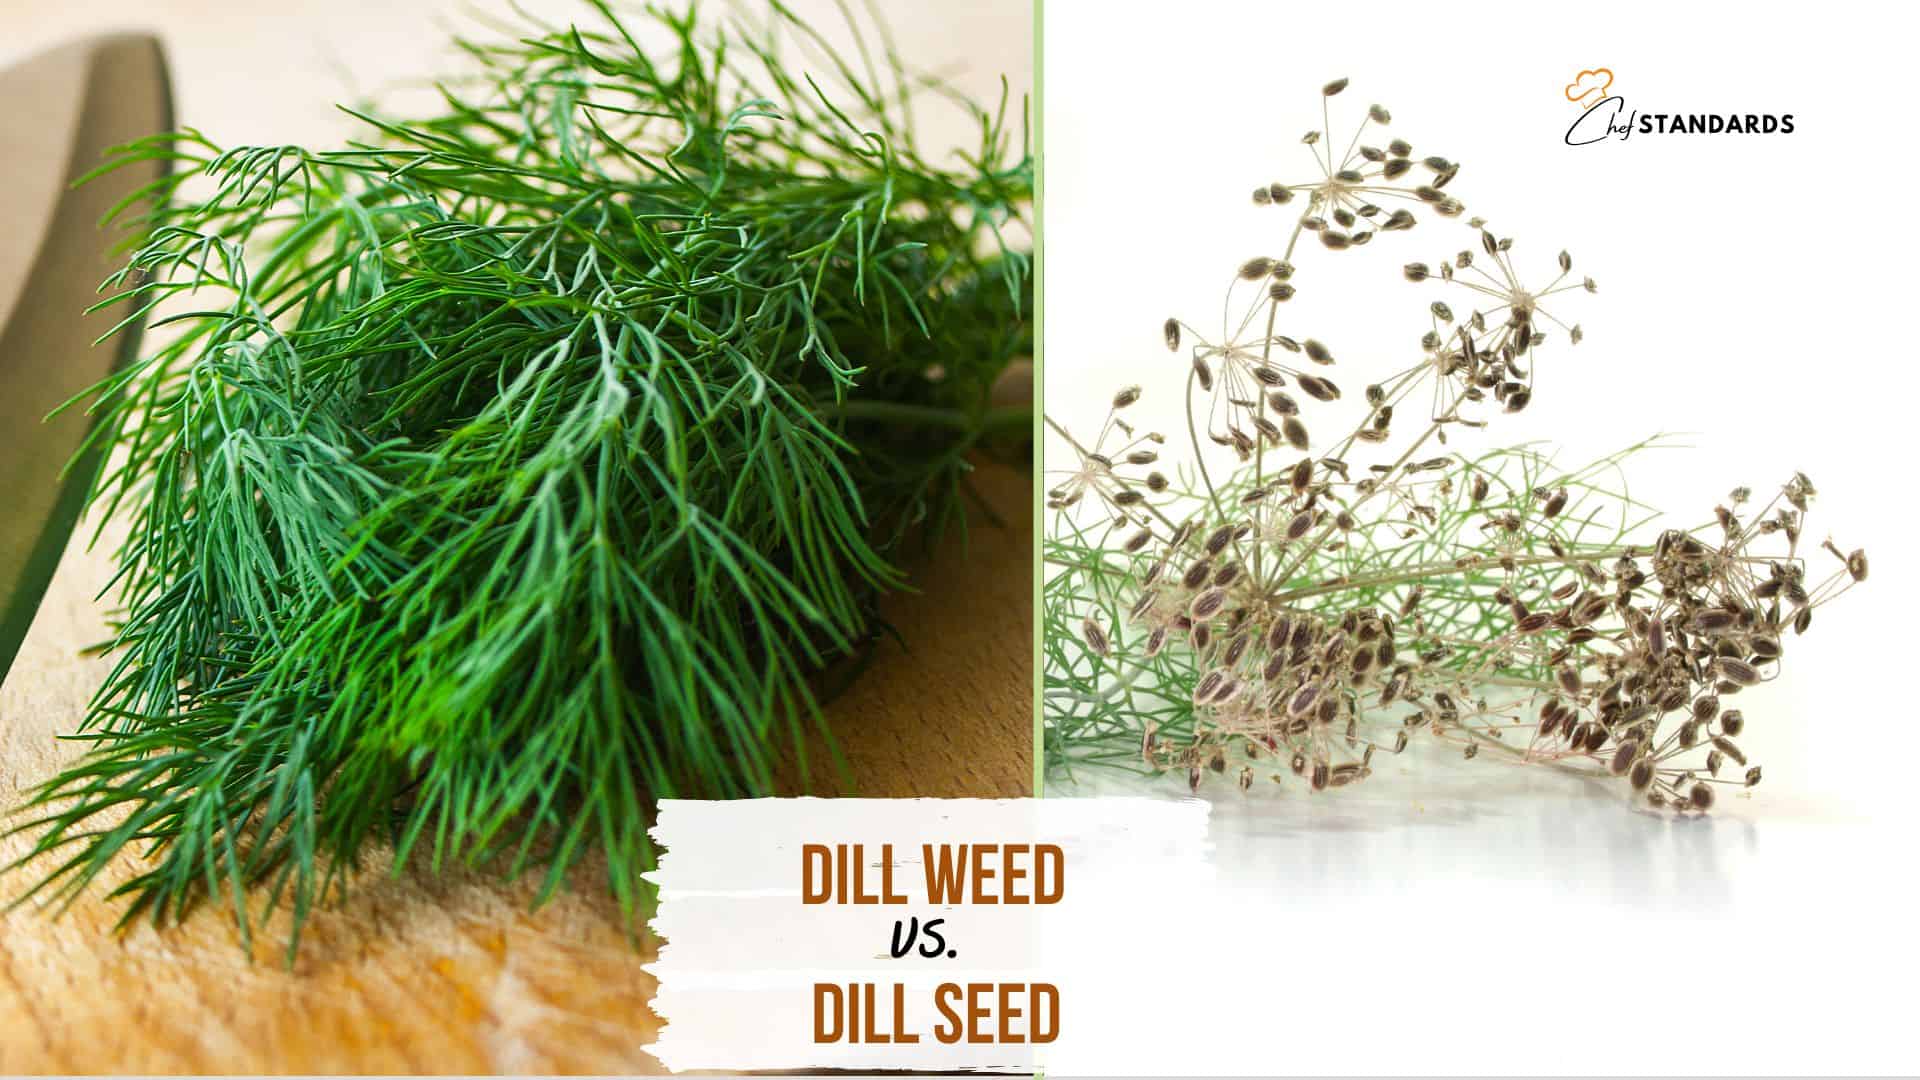 dill weed vs dill seed